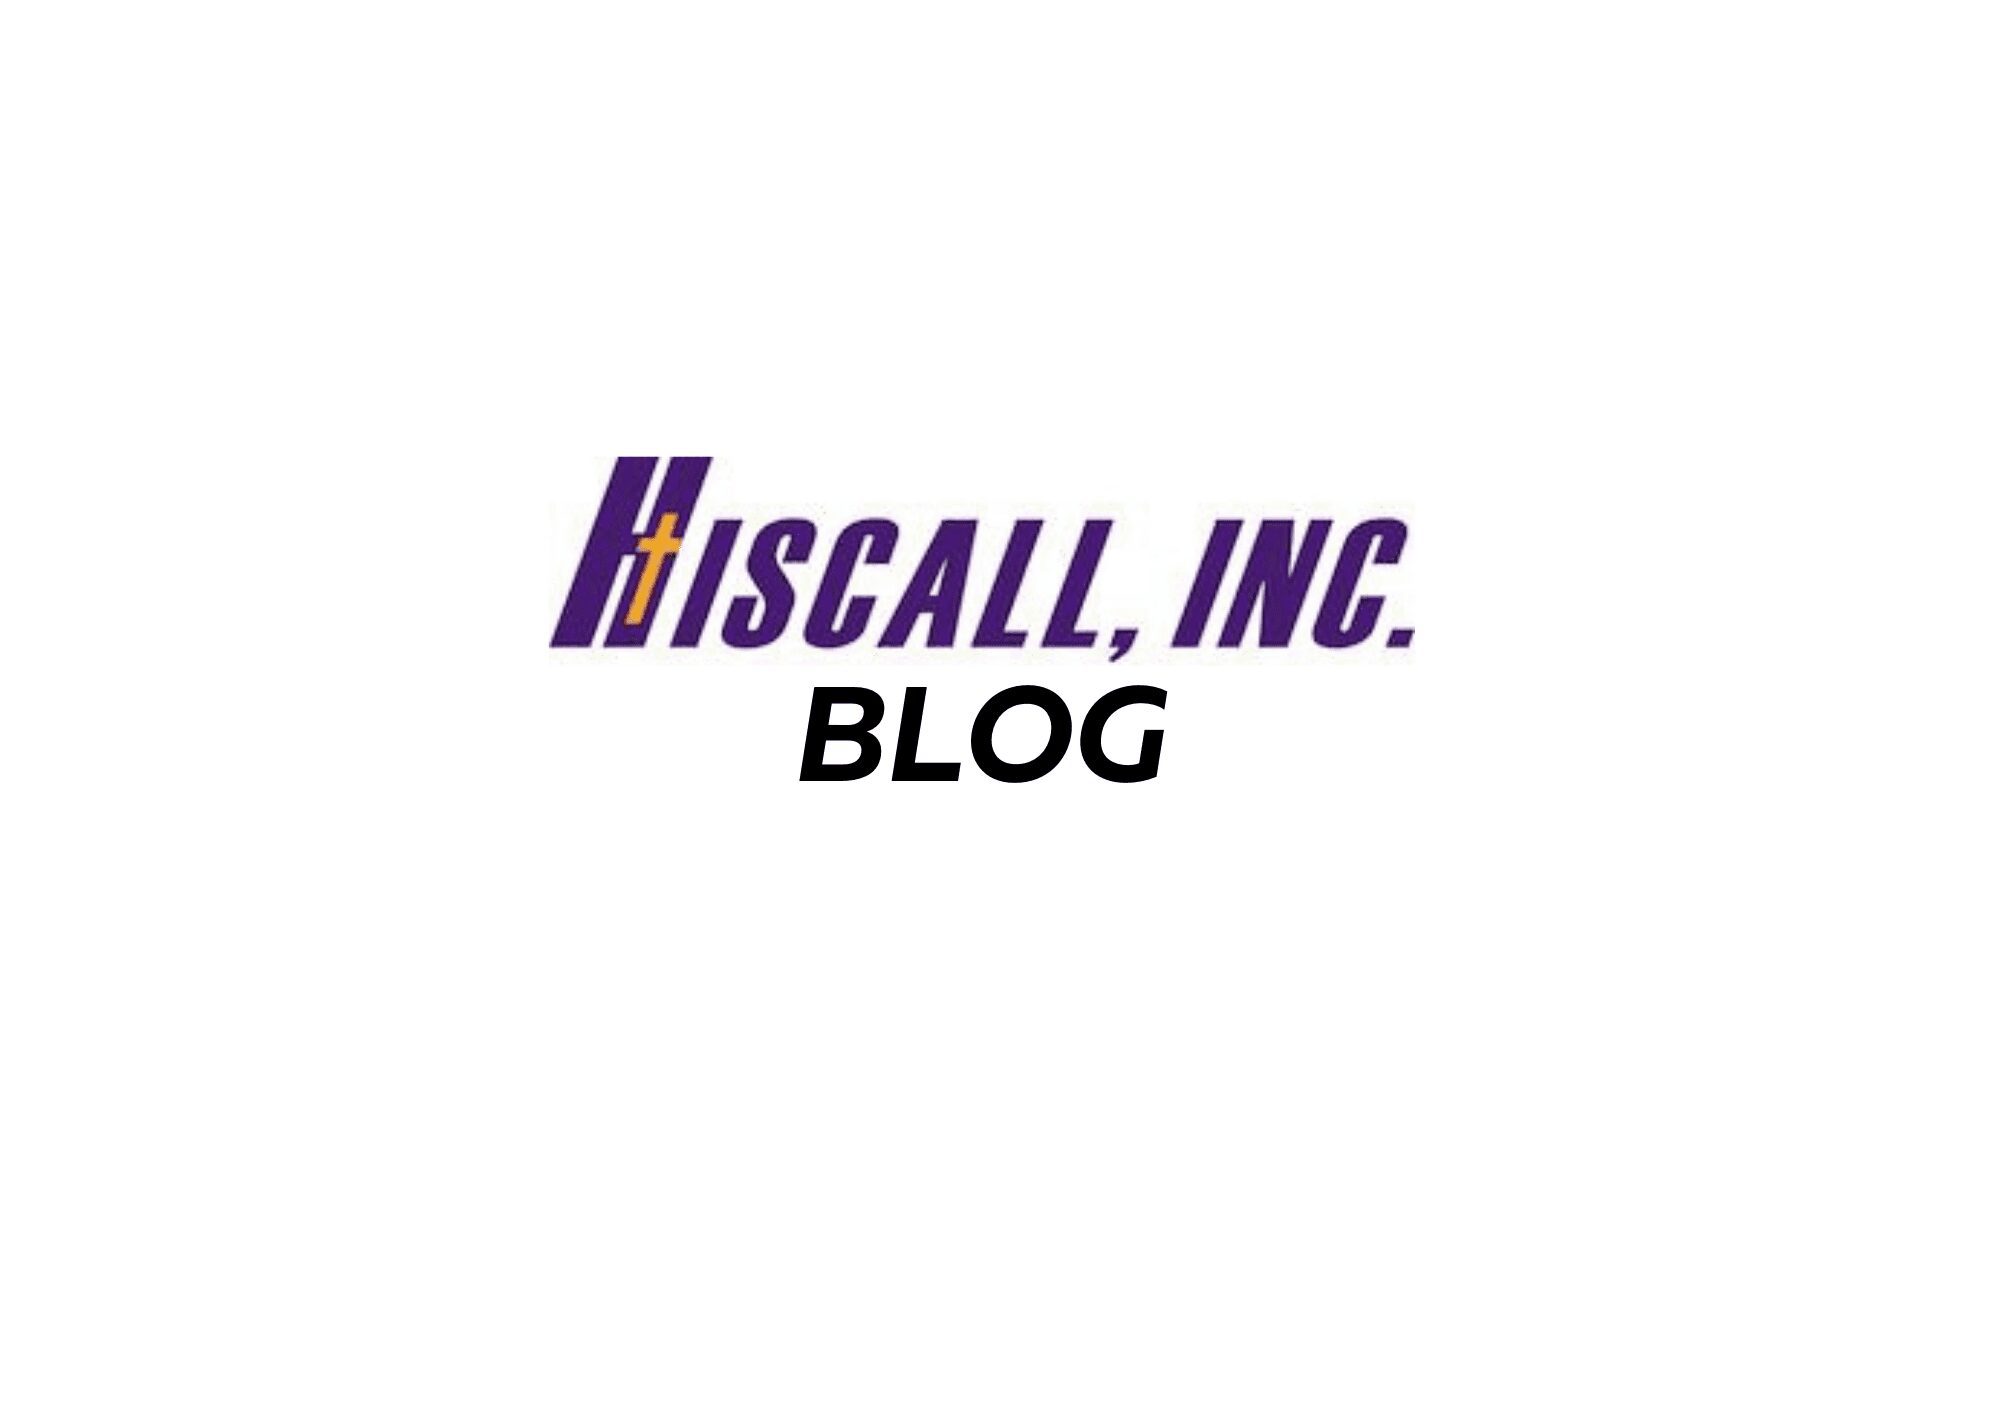 Hiscall, Inc. Becomes A Member Of The Mid-South Sign Association, An Affiliate Of The International Sign Association